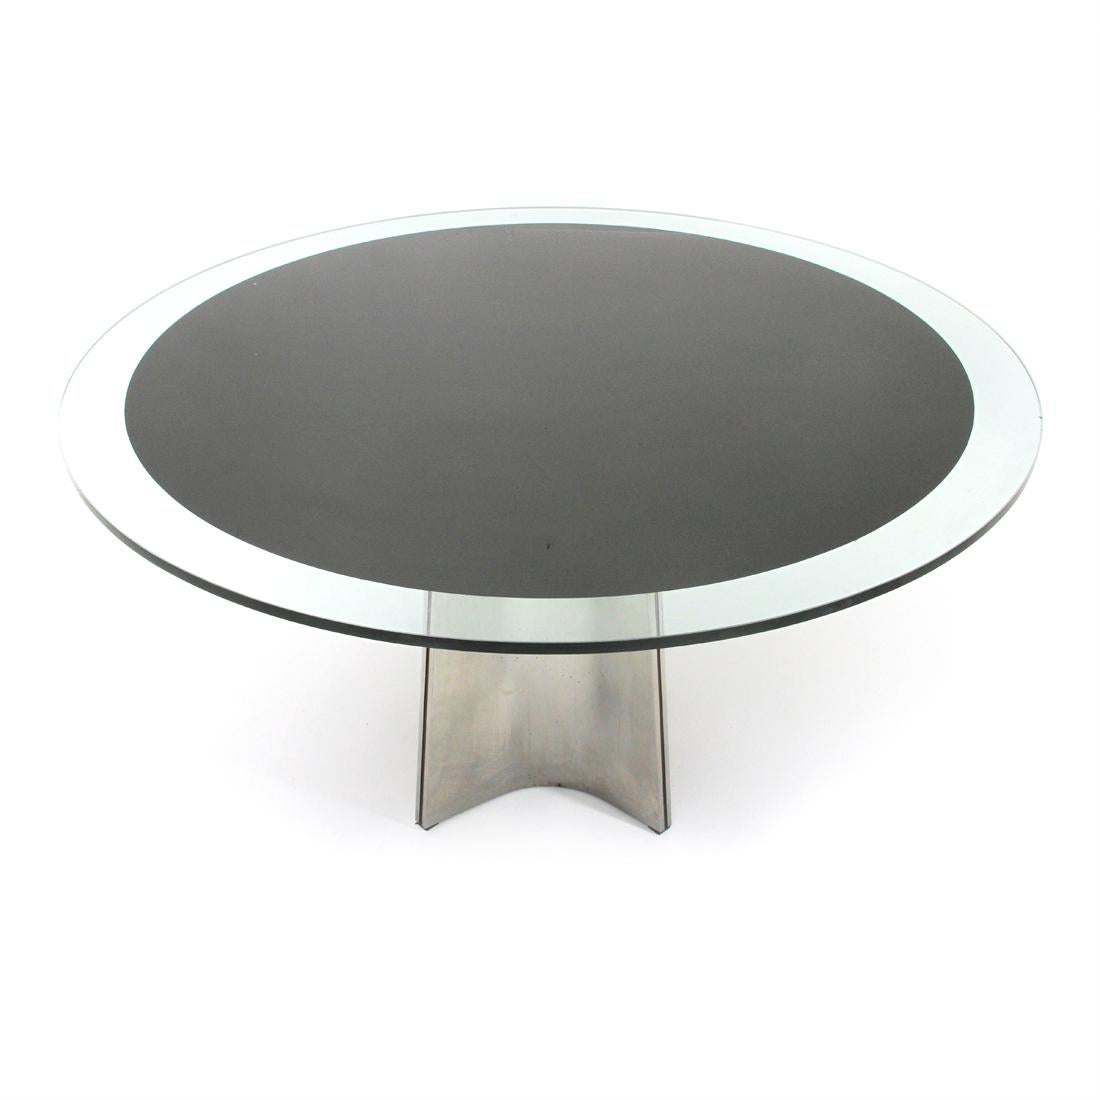 Dining table produced by Arrmet in the 1970s on a design by Luigi Saccardo.
Structure in black painted metal and bands in folded steel.
Circular top in thick glass.
Good general conditions, some signs and scratch due to normal use over time, two